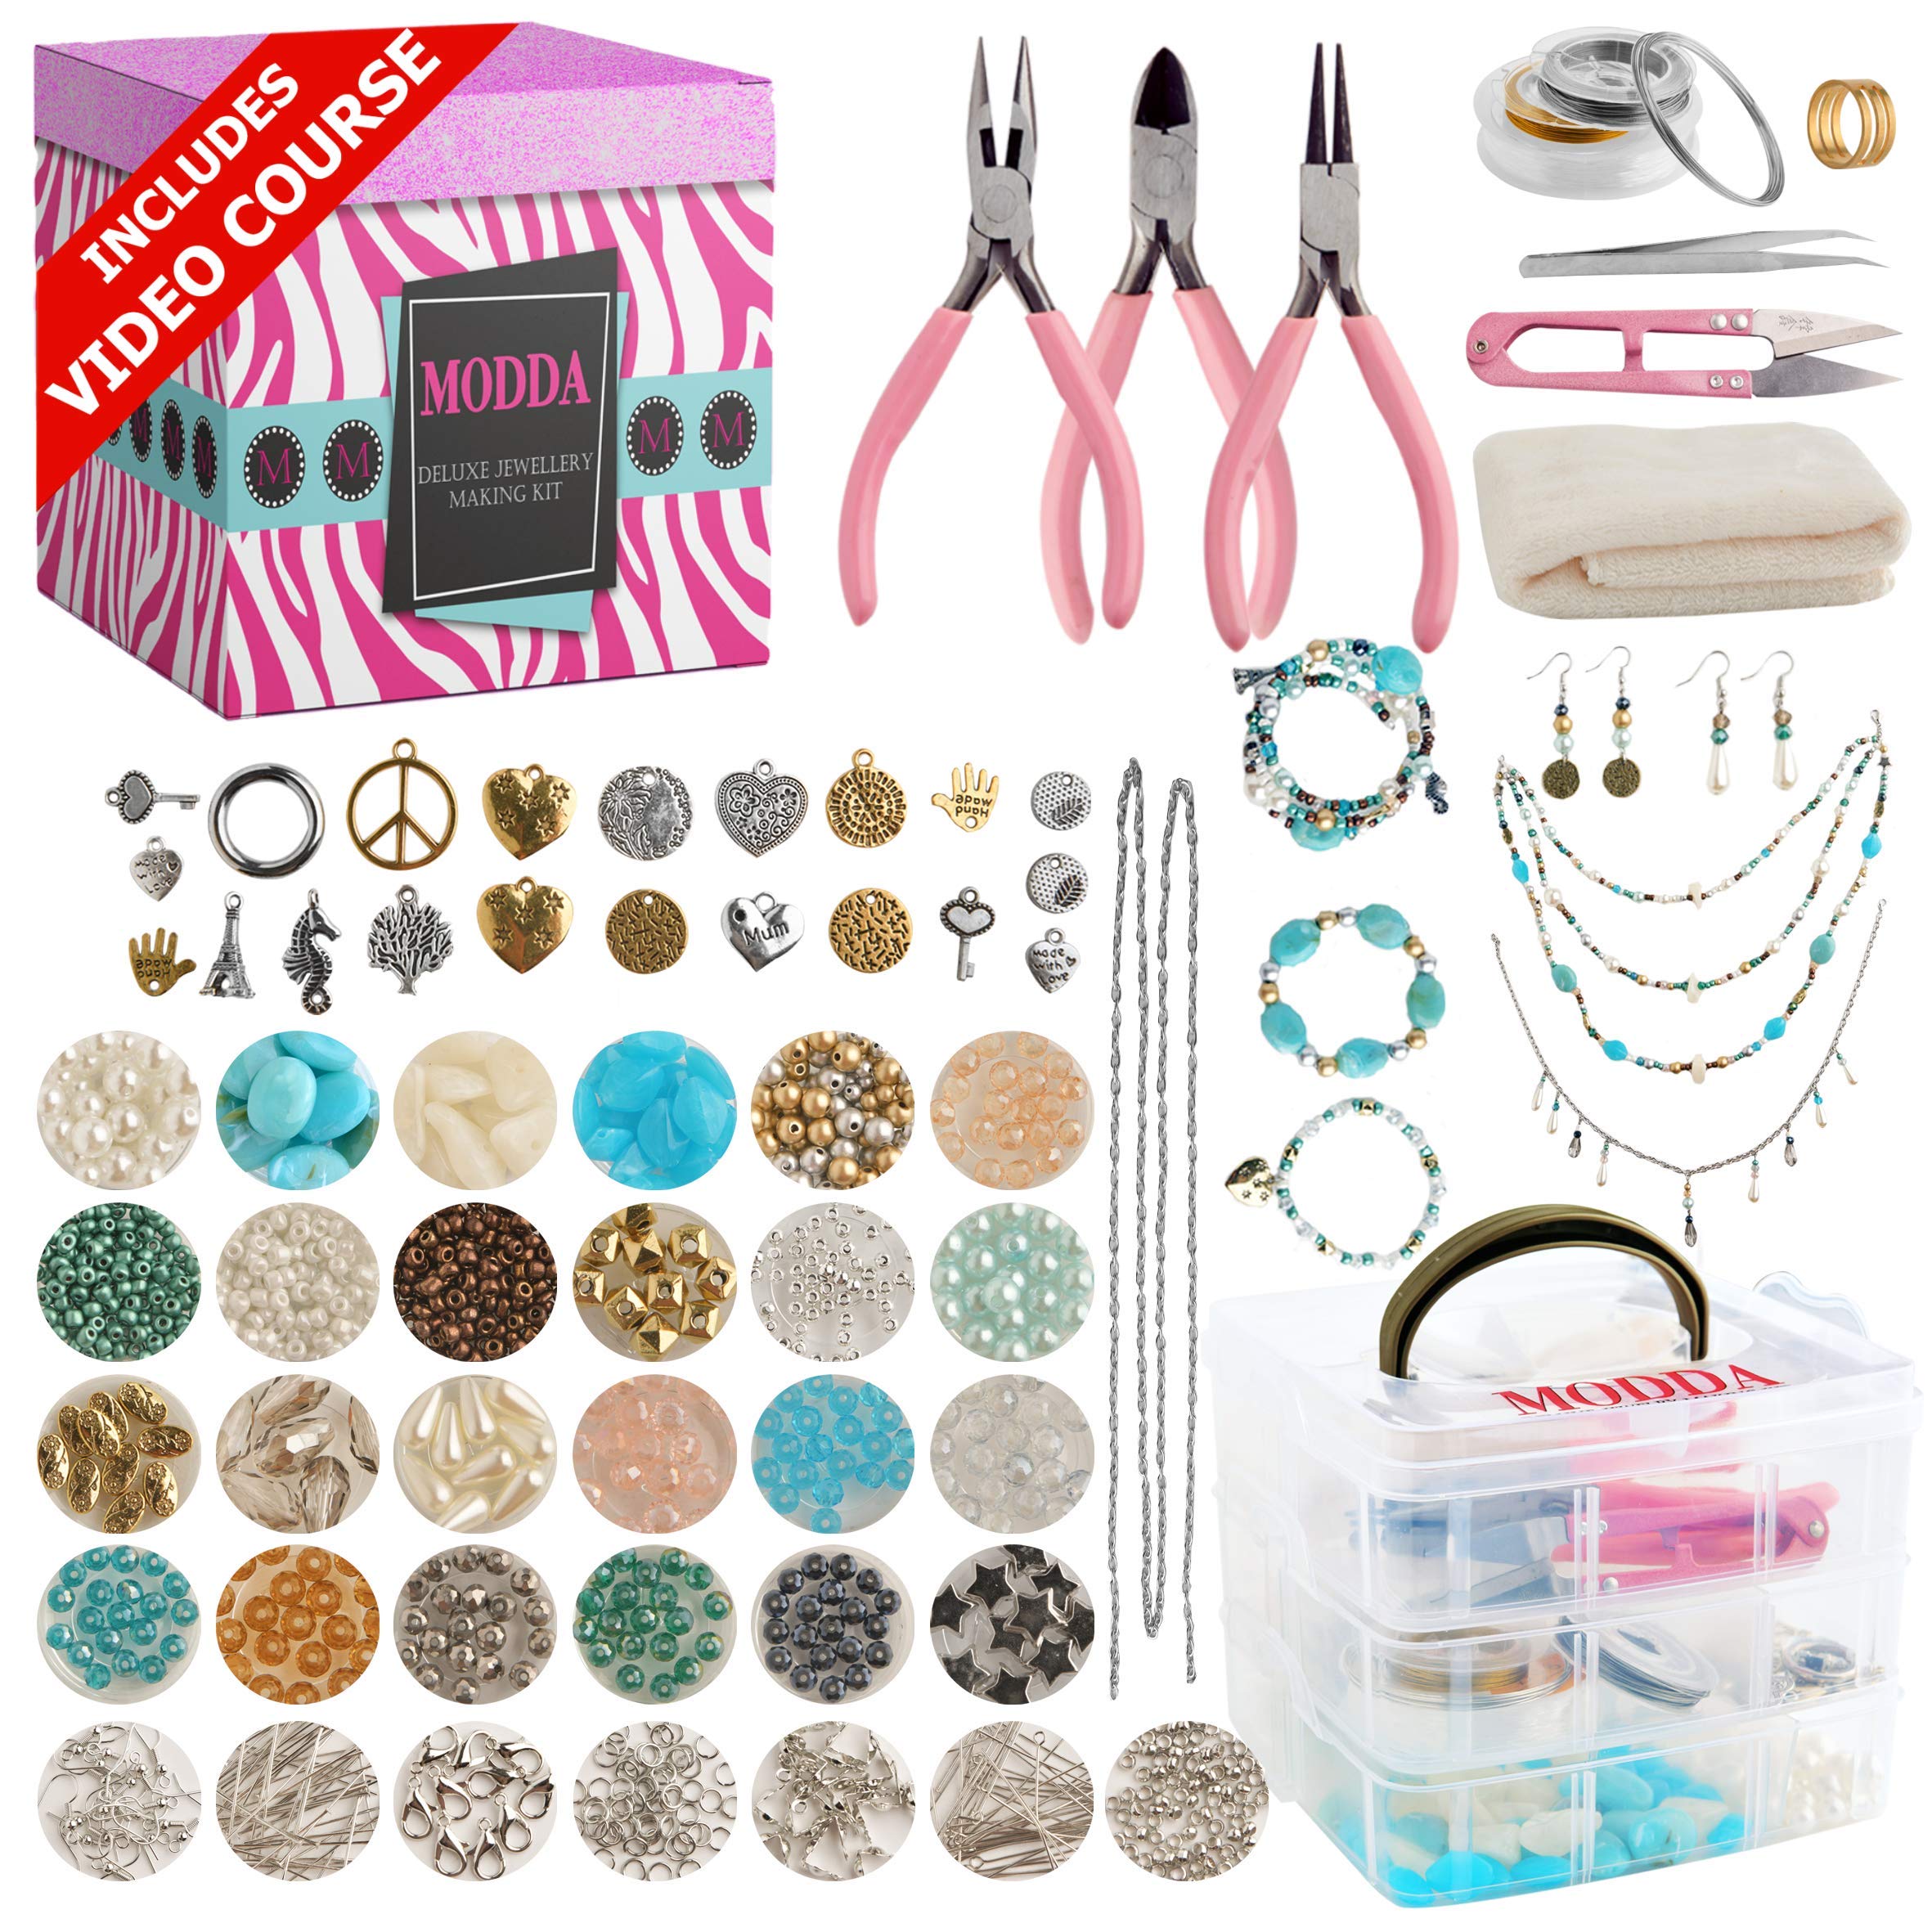 Modda Deluxe Jewelry Making Kit with Video Course Includes